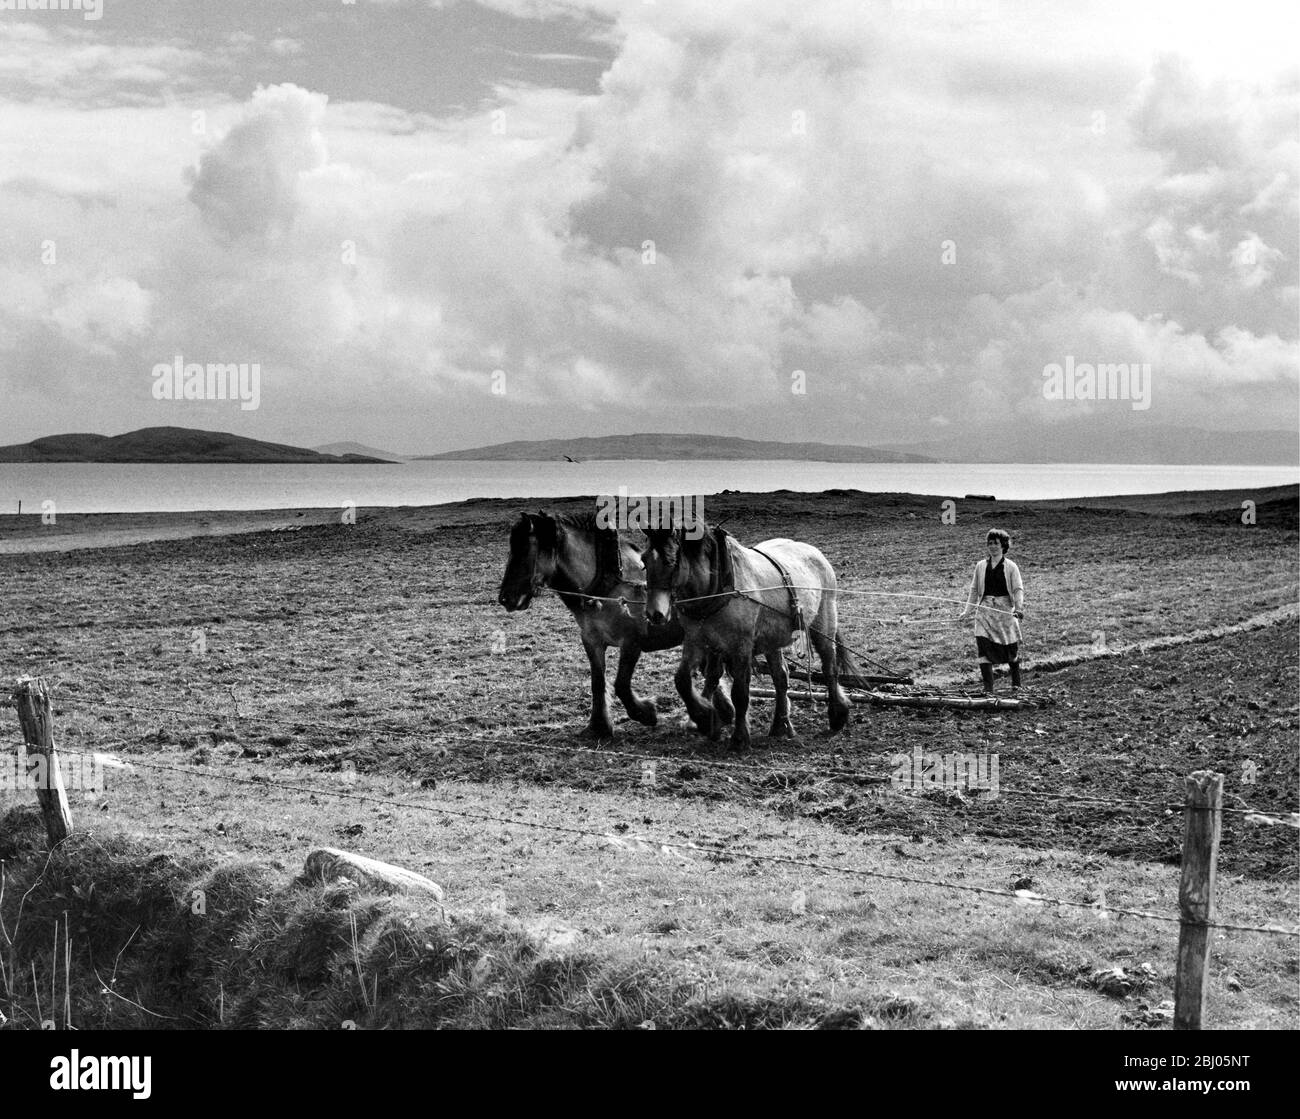 Start of the spring cultivations in the Hebrides. Spring is late this year - in the Outer Henrides, and only now are farmers and crofters beginning to get their land into shape. - This picture, on South Uist, shows a Scottish lass driving a pair of horses on the harrow. The crop is likely to be oats or turnips, or rye or greenstuff - for the farming system is carried out in narrow strips. - 21/5/62 Stock Photo